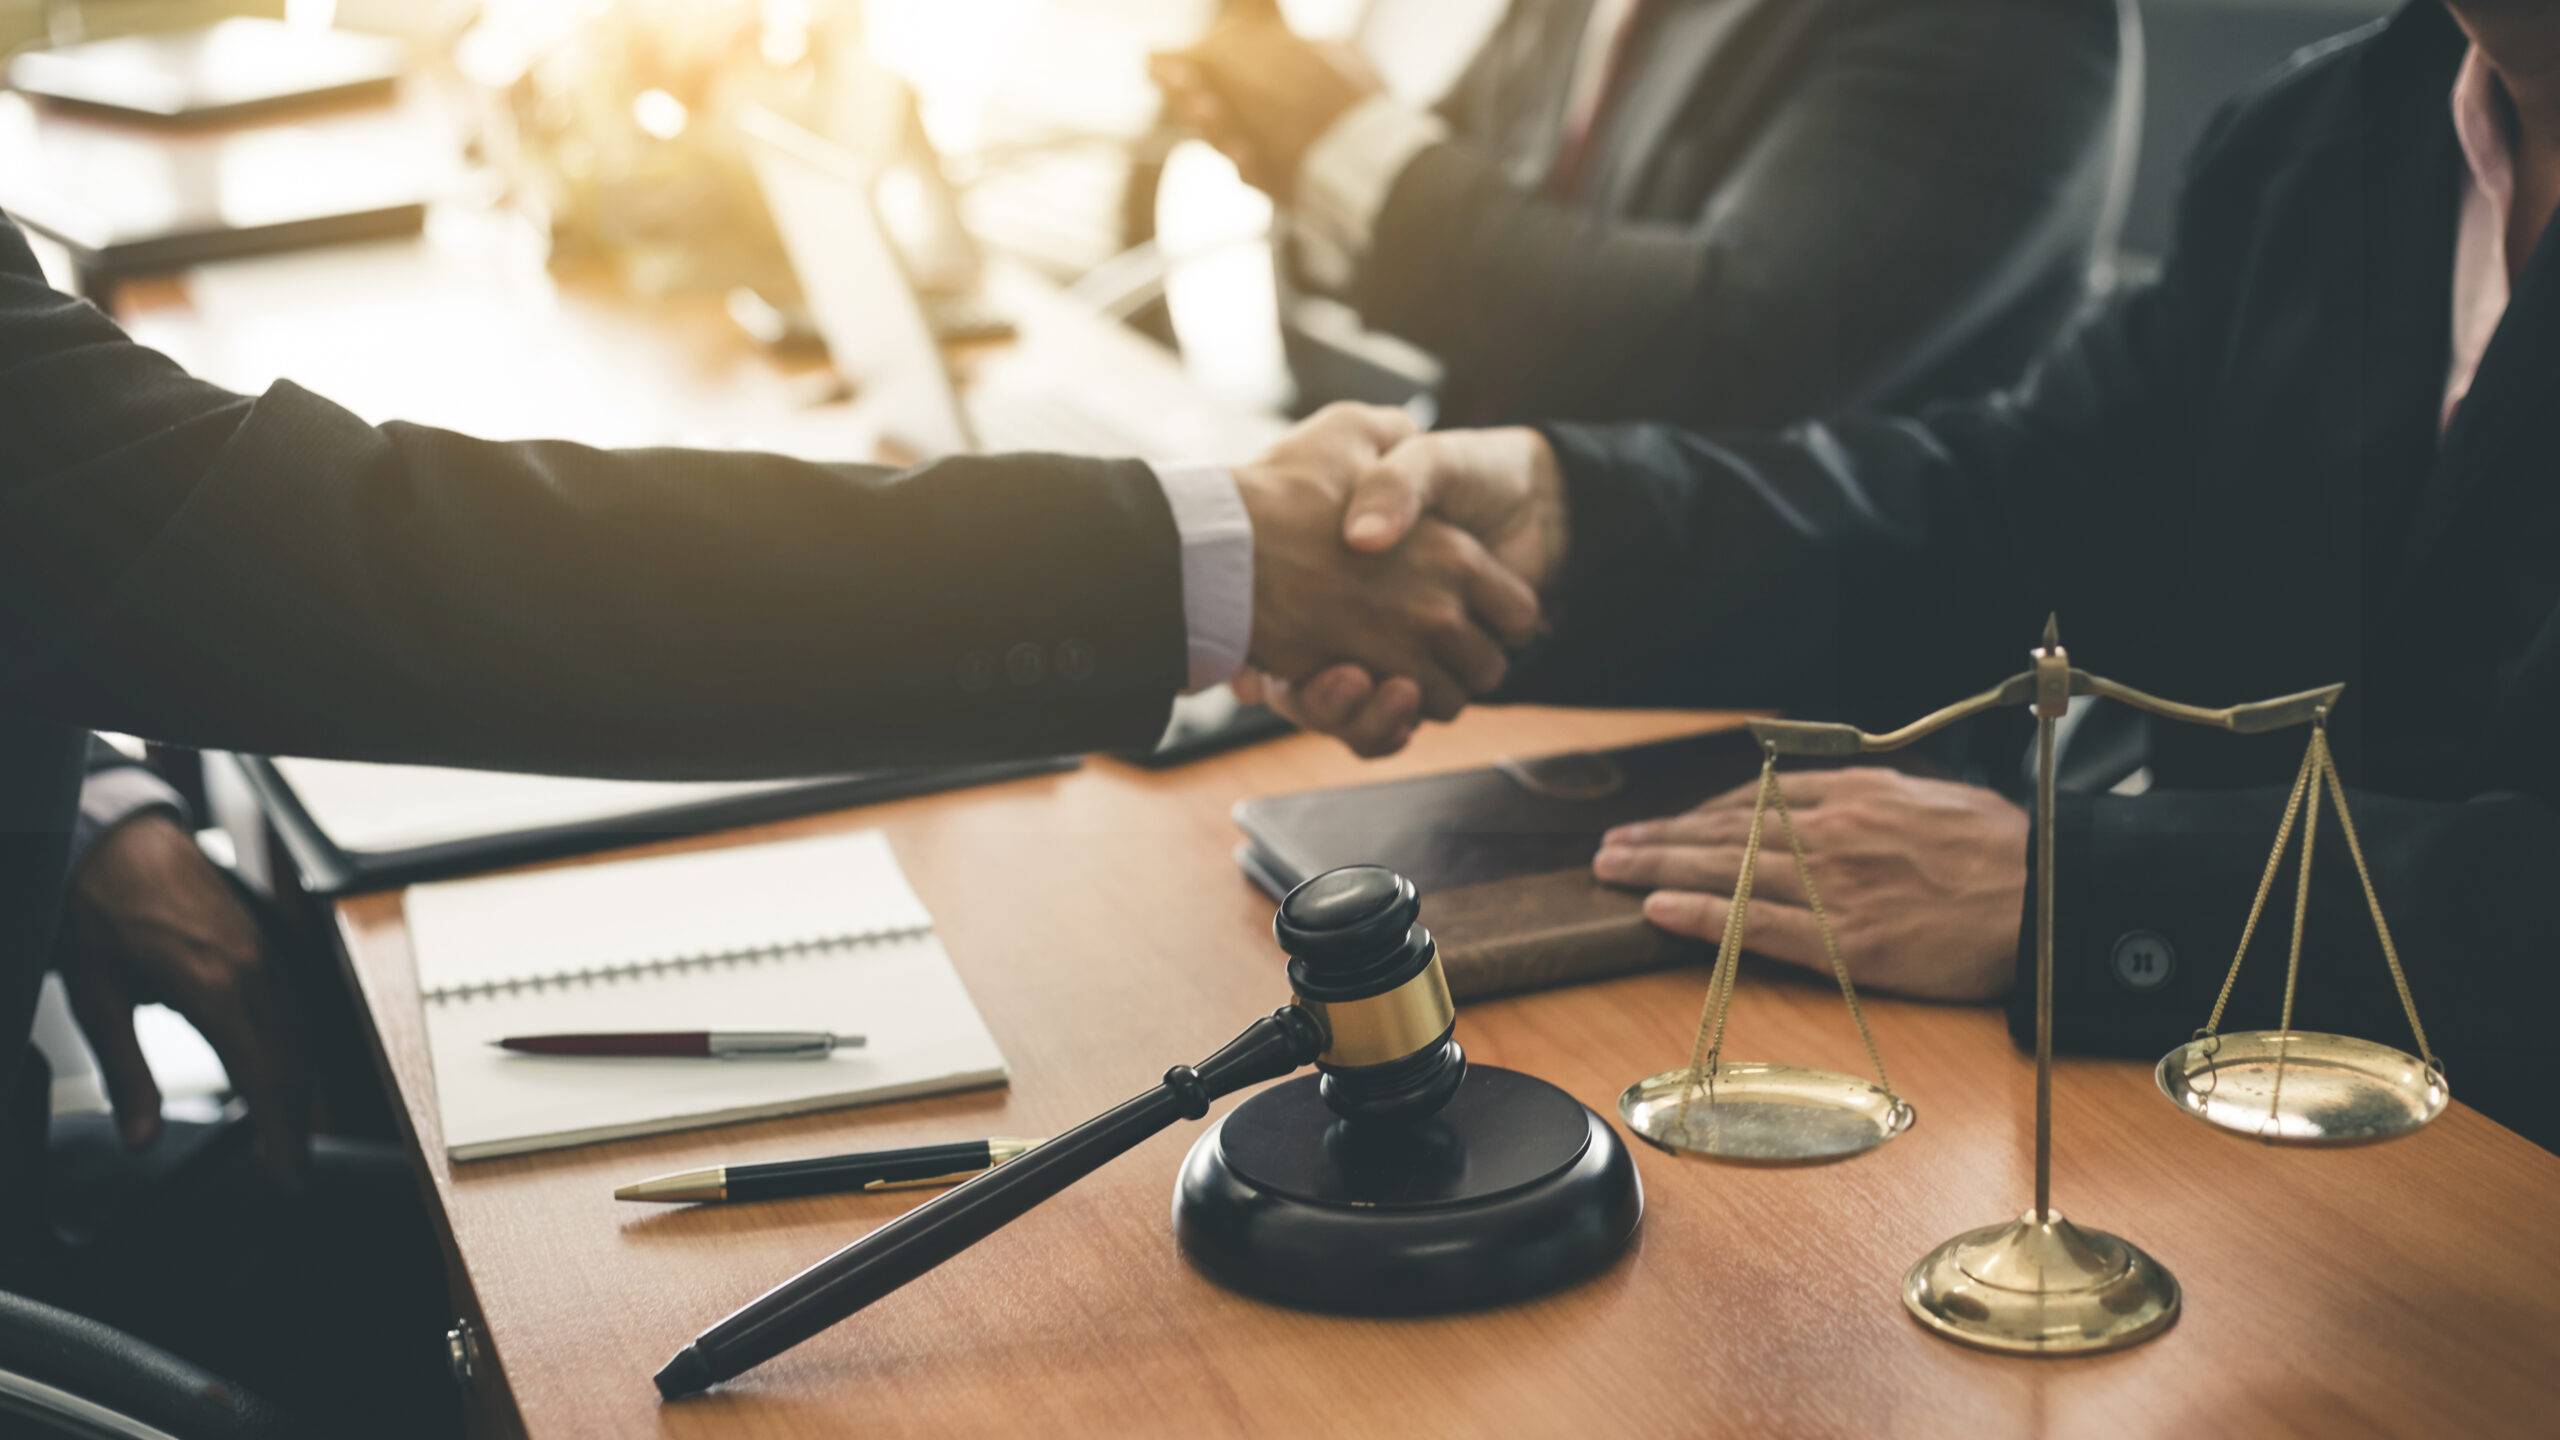 Getting business for your law firm